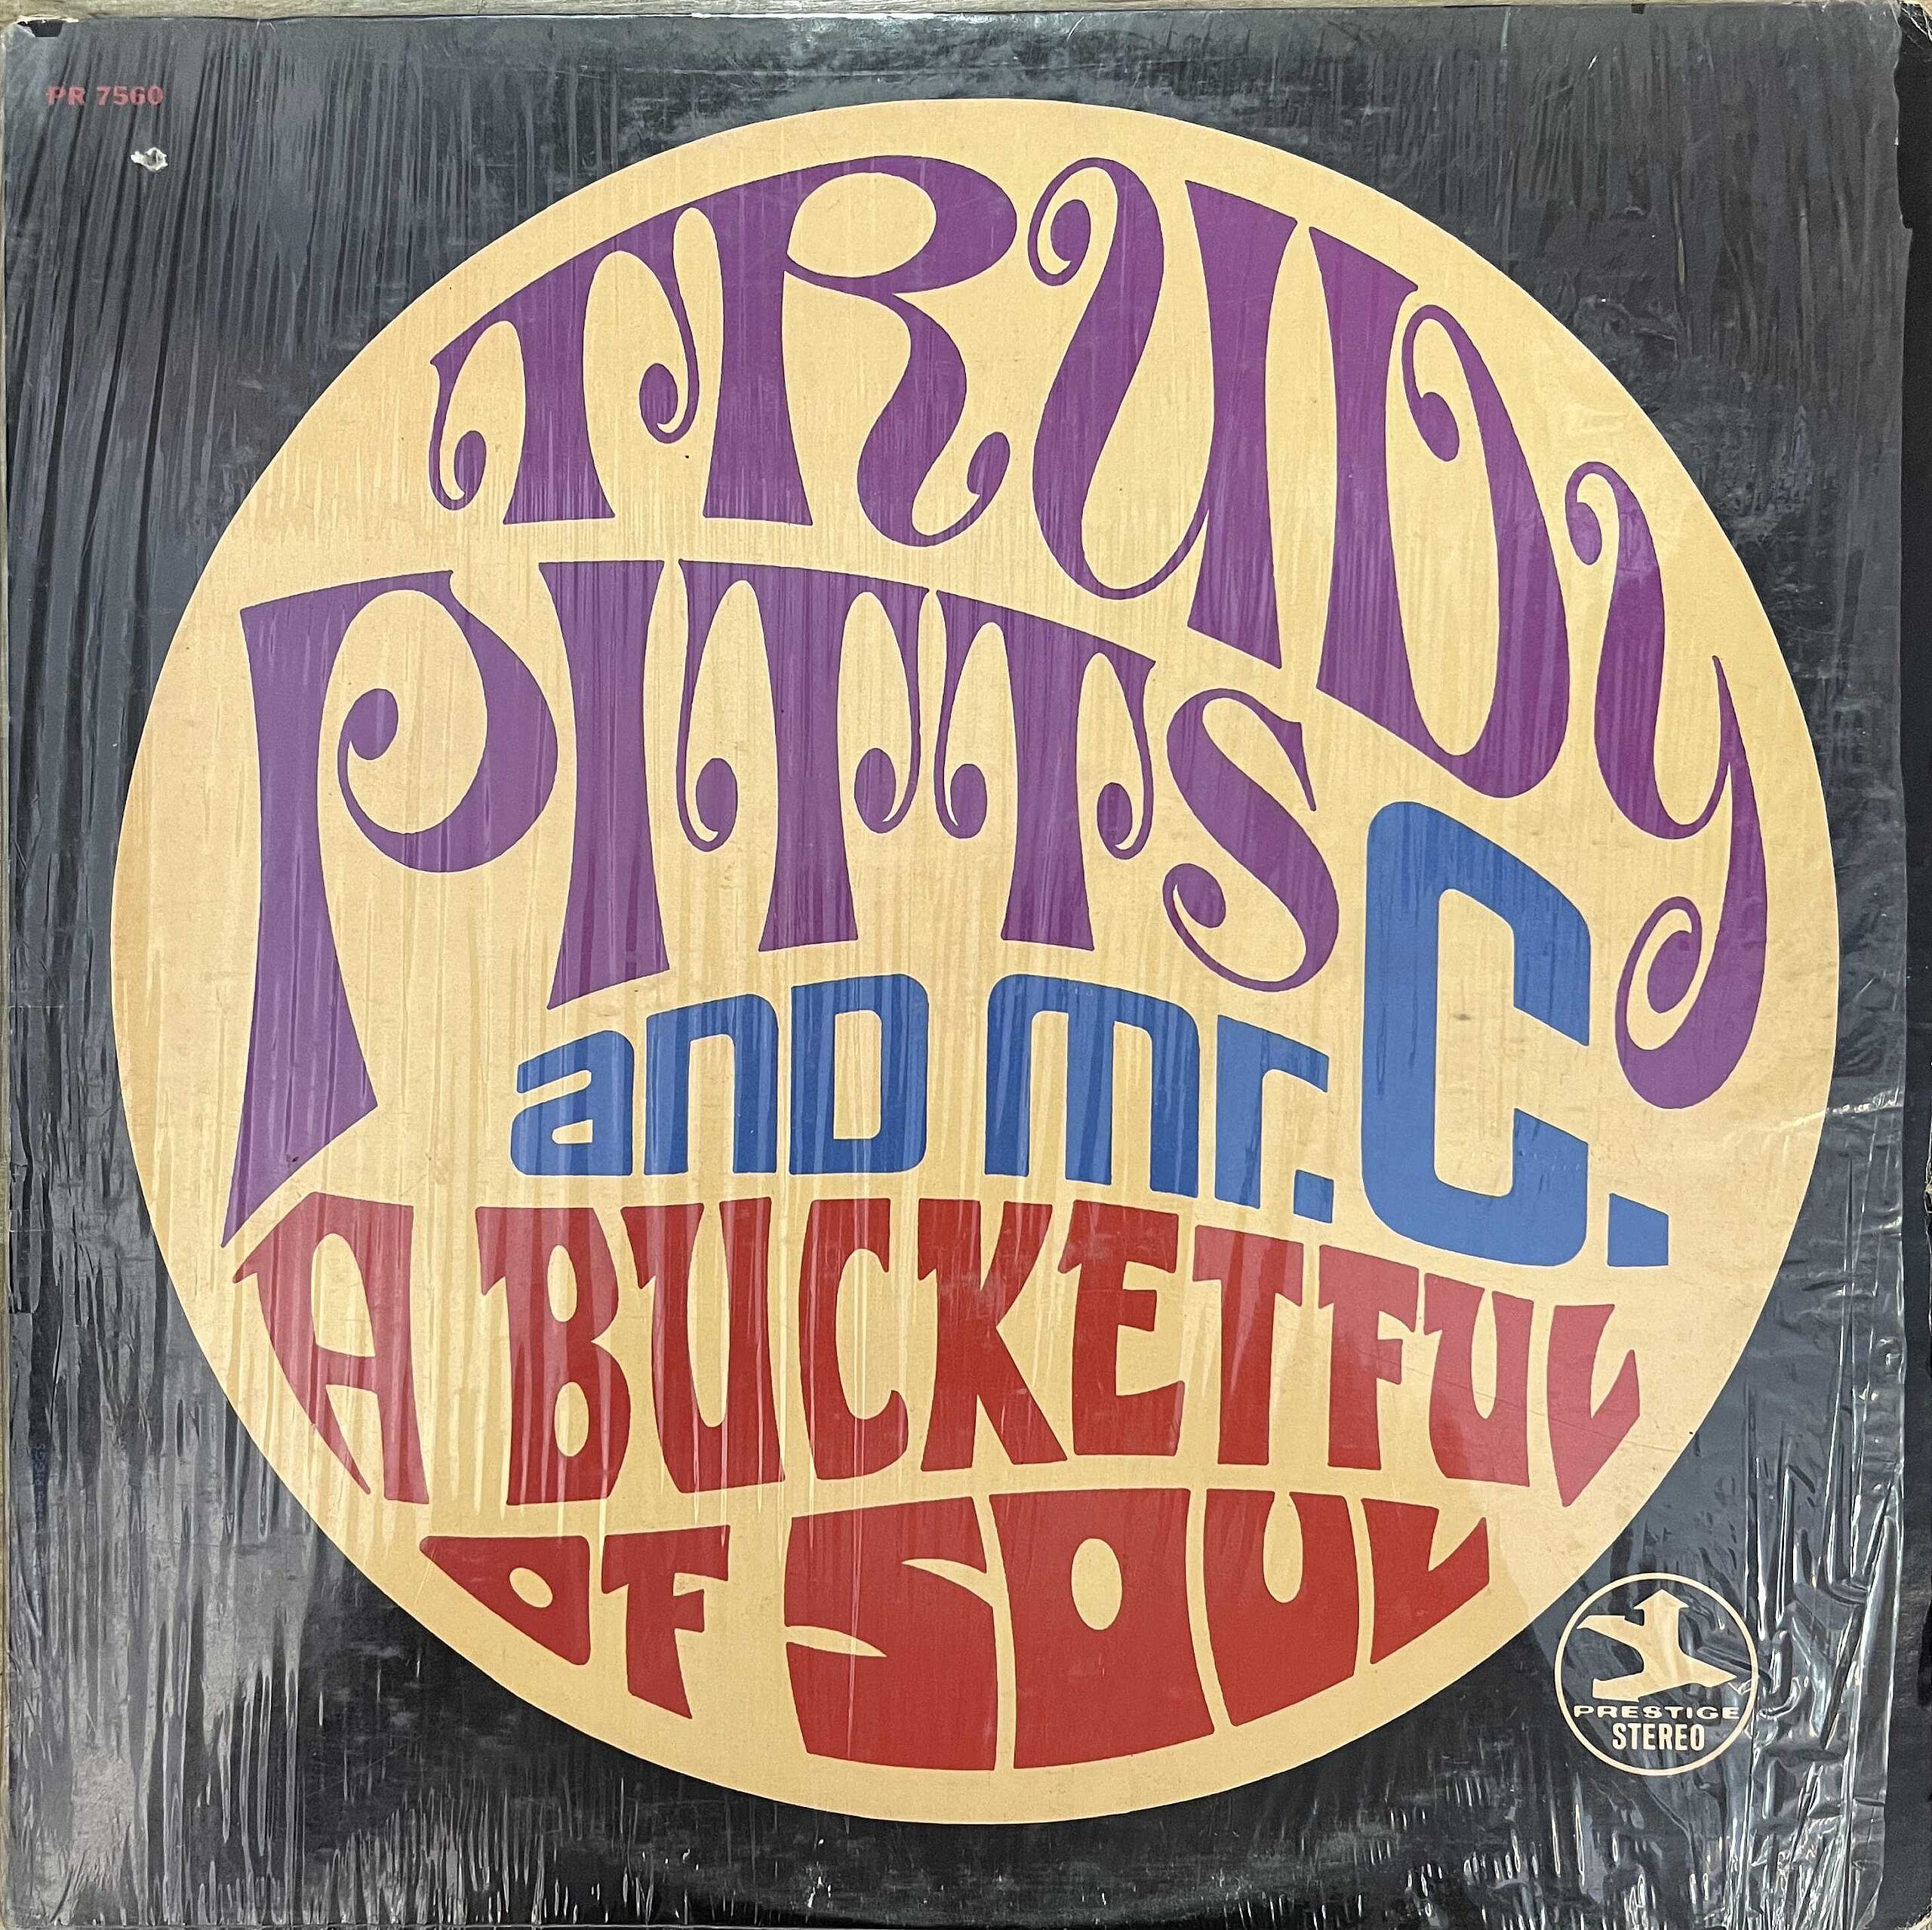 Trudy Pitts & Mr C A Bucketful of Soul